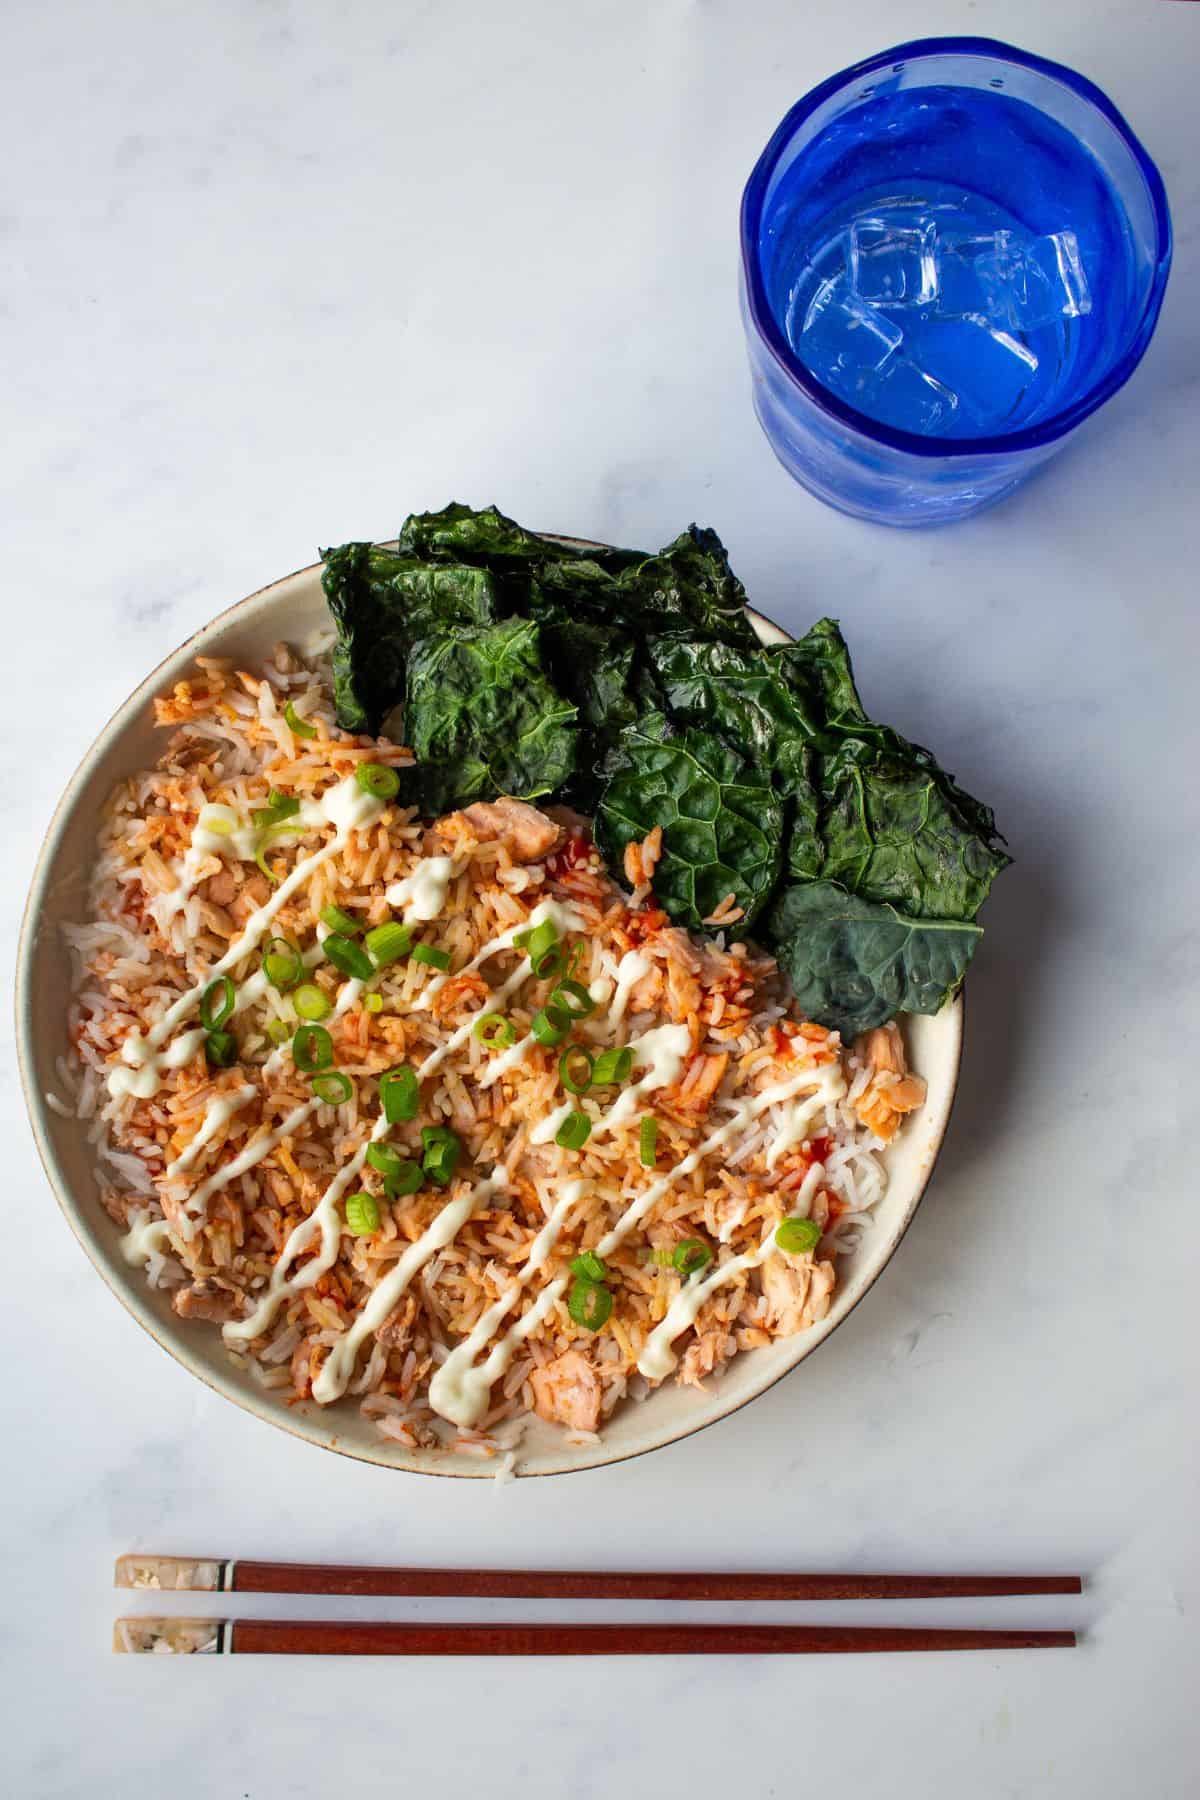 Salmon rice bowl served with kale with a blue glass with water and chopsticks next to the bowl.